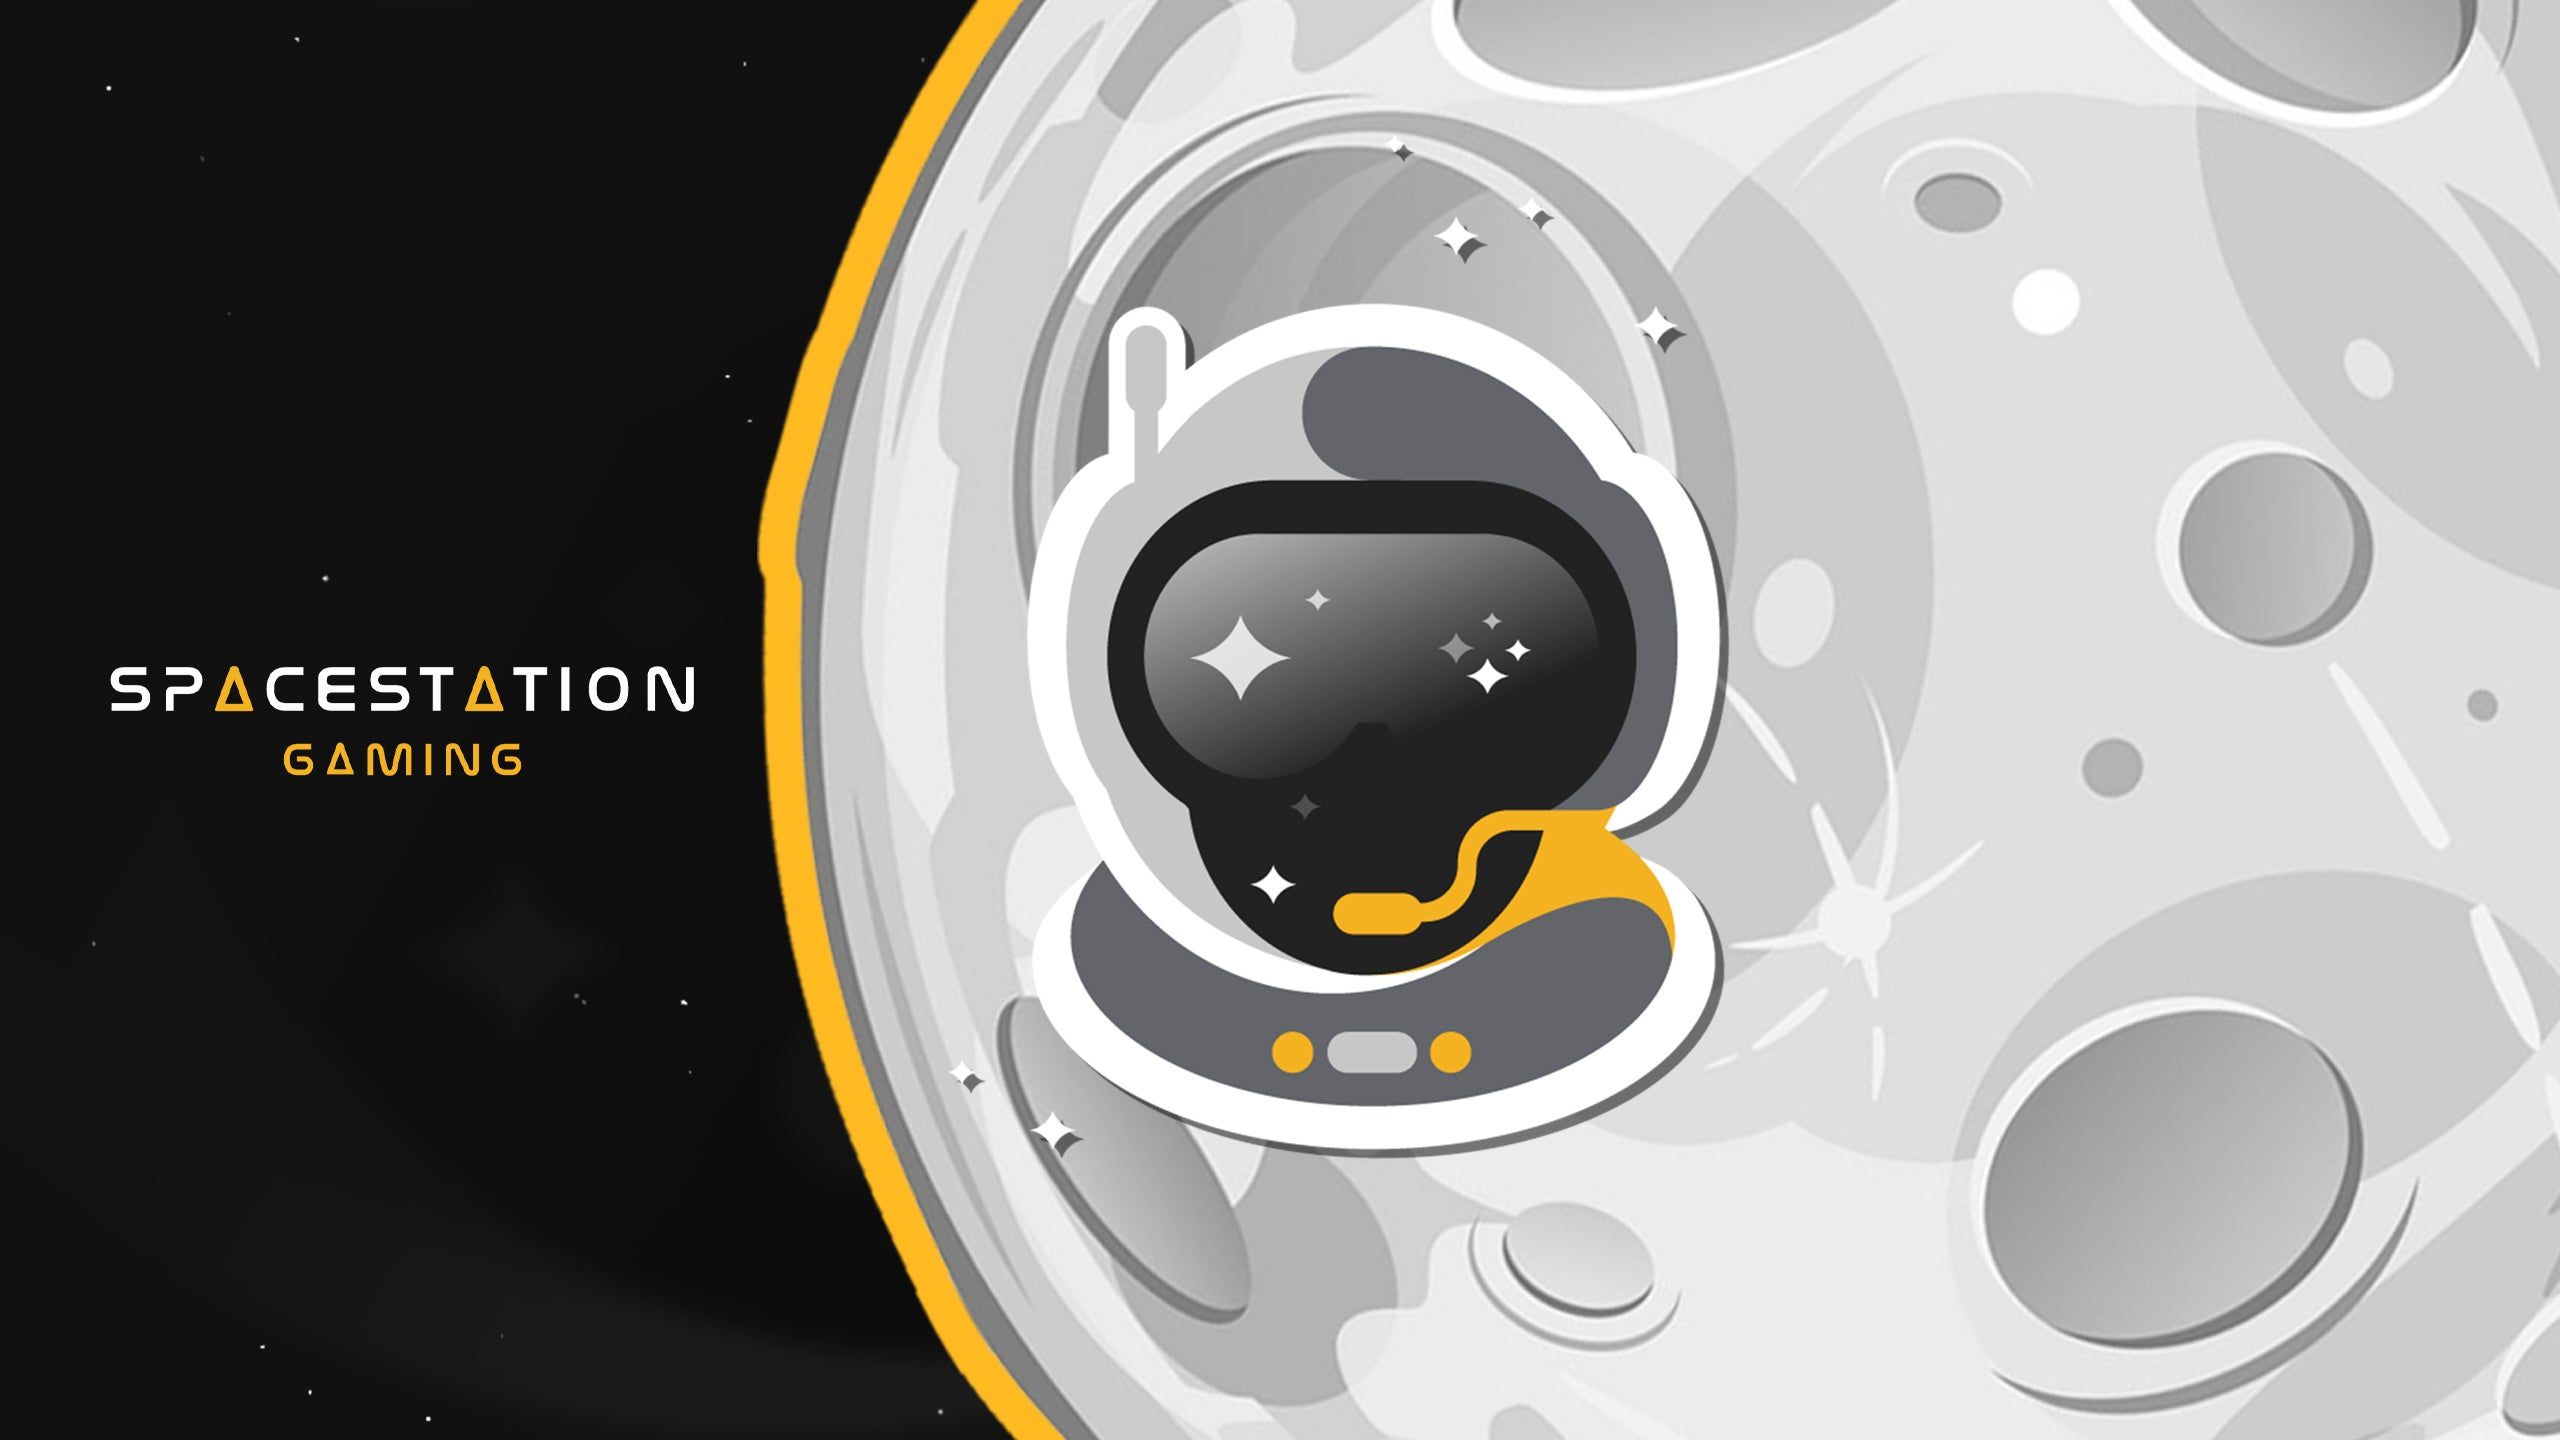 SpacestationGG // 2020 Branding Project!